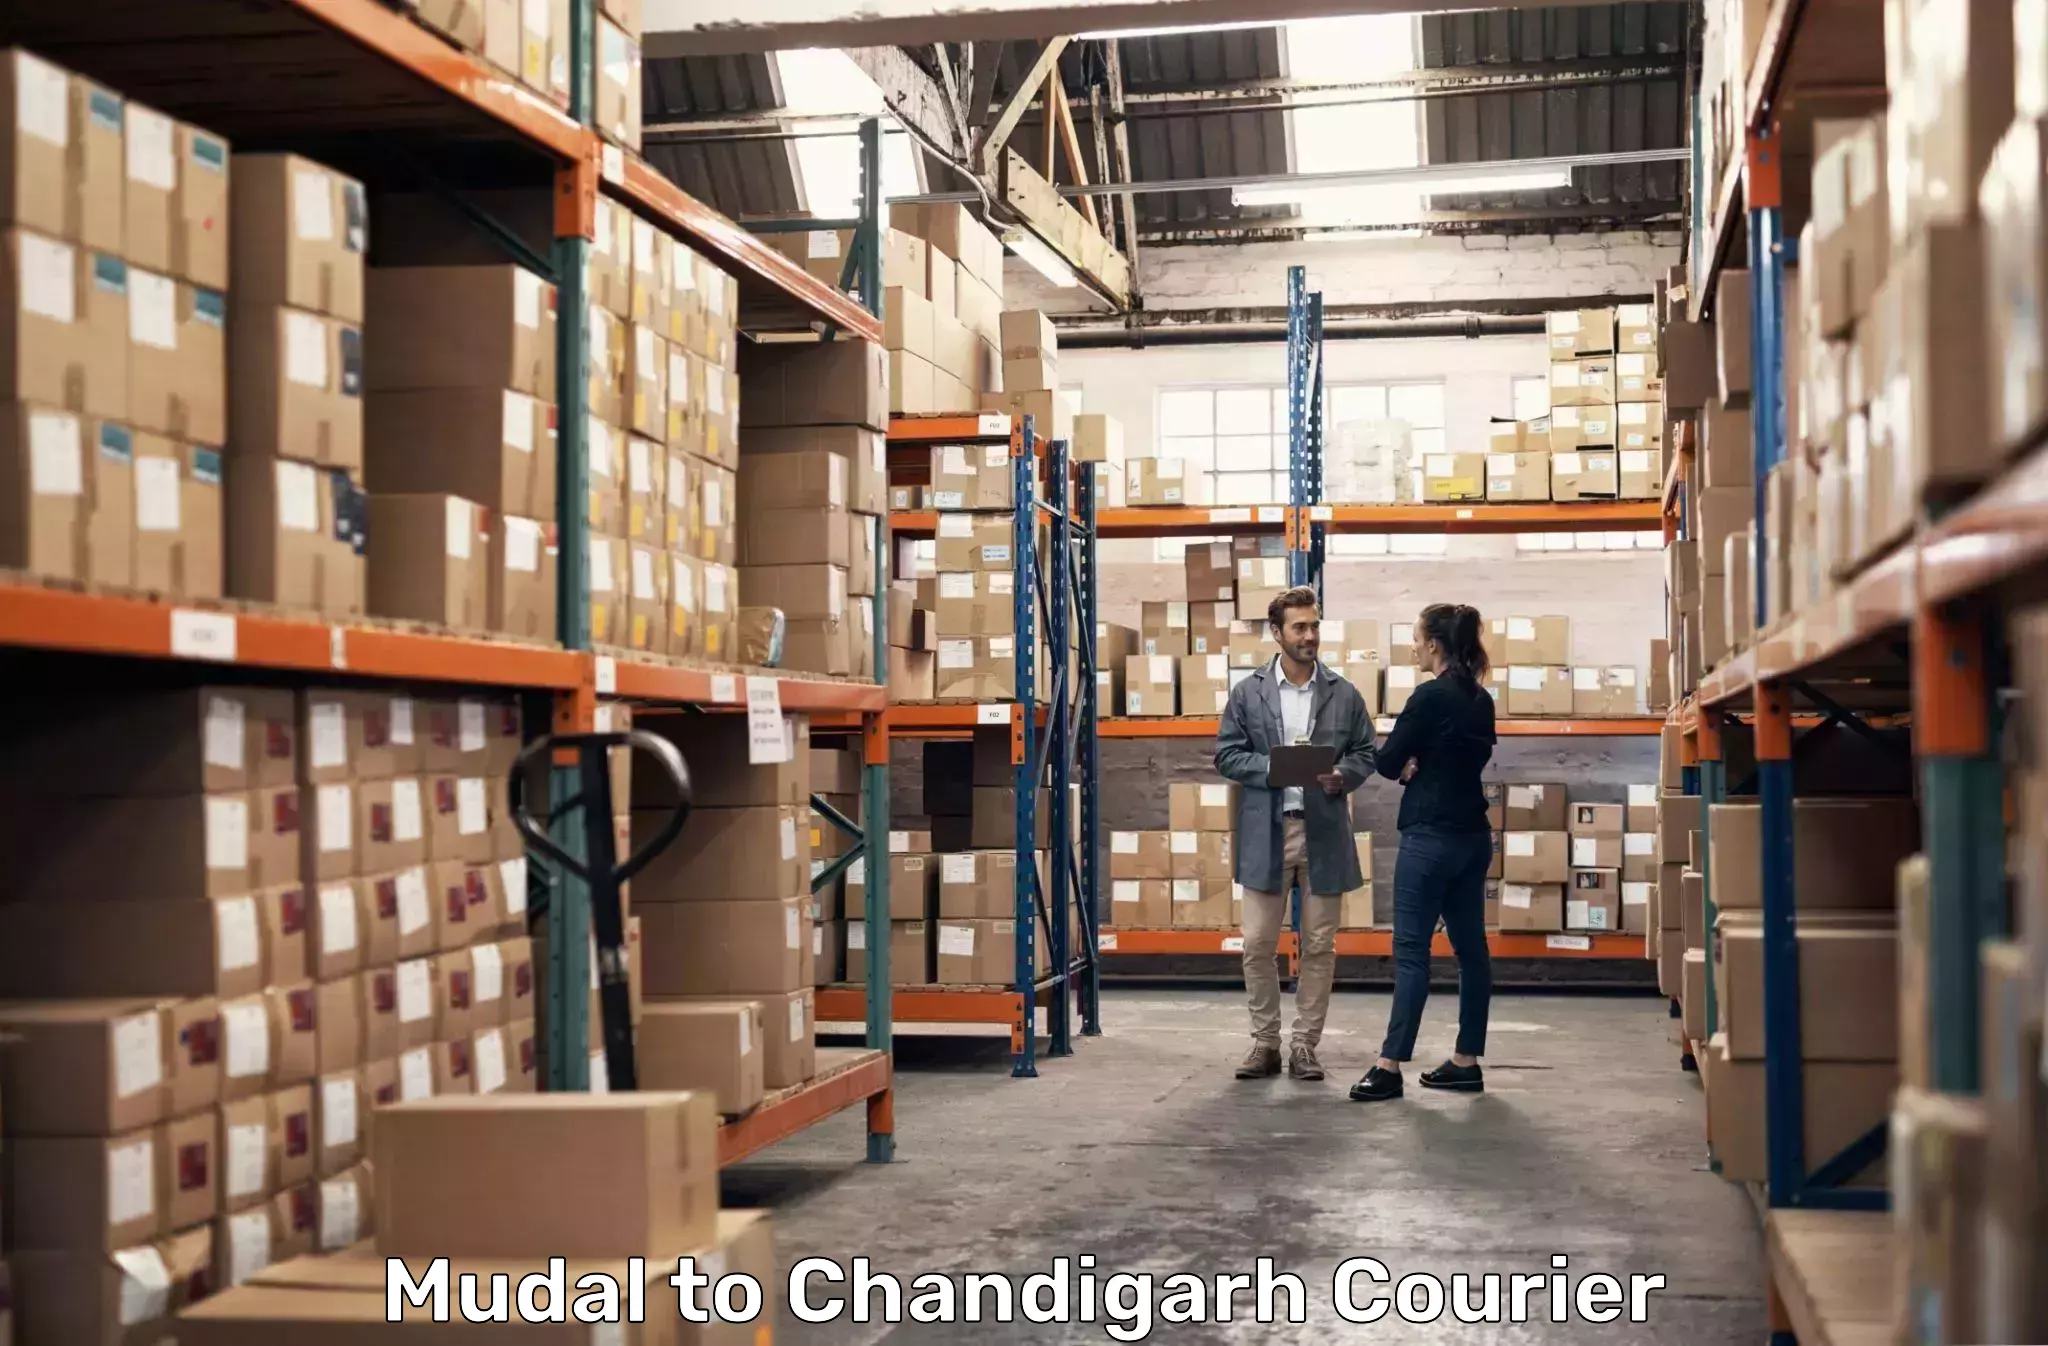 Global freight services Mudal to Chandigarh